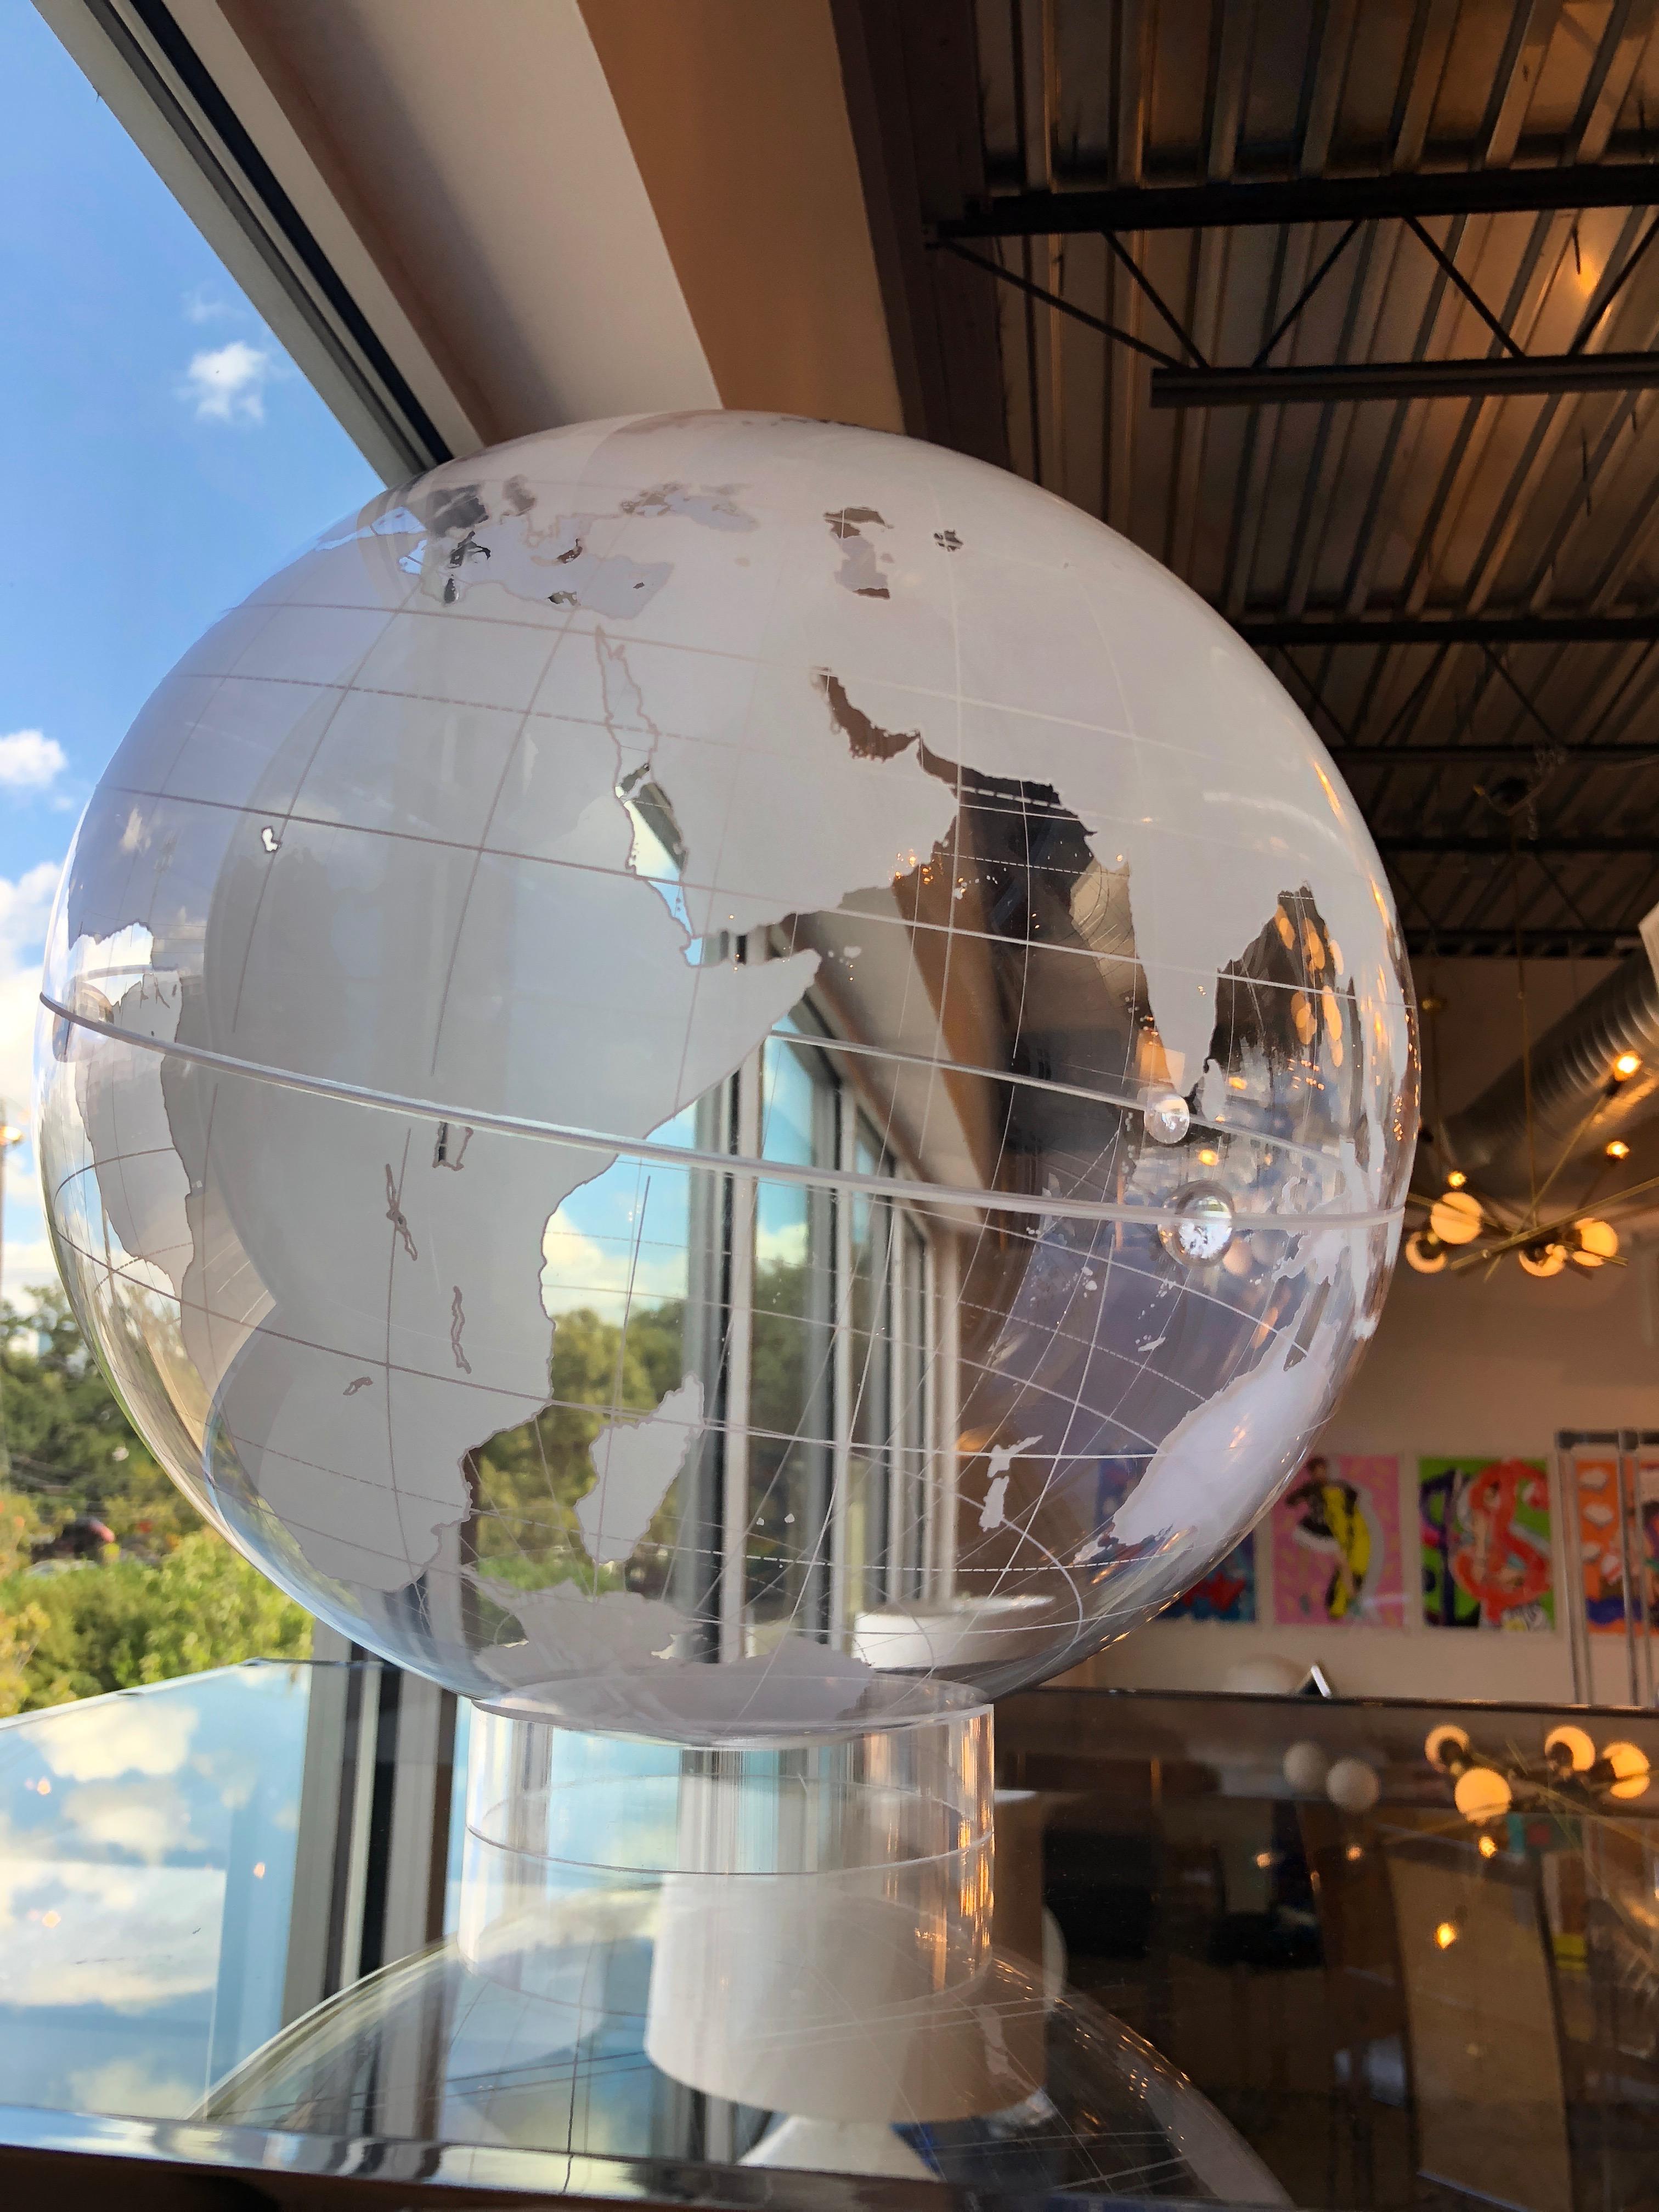 Offered is a Mid-Century Modern world globe with a clear background and frosted continents sitting atop a circular thick clear Lucite base. The globe has a smaller hole at the top in the event that the globe is hung. It is groovy man! What a great